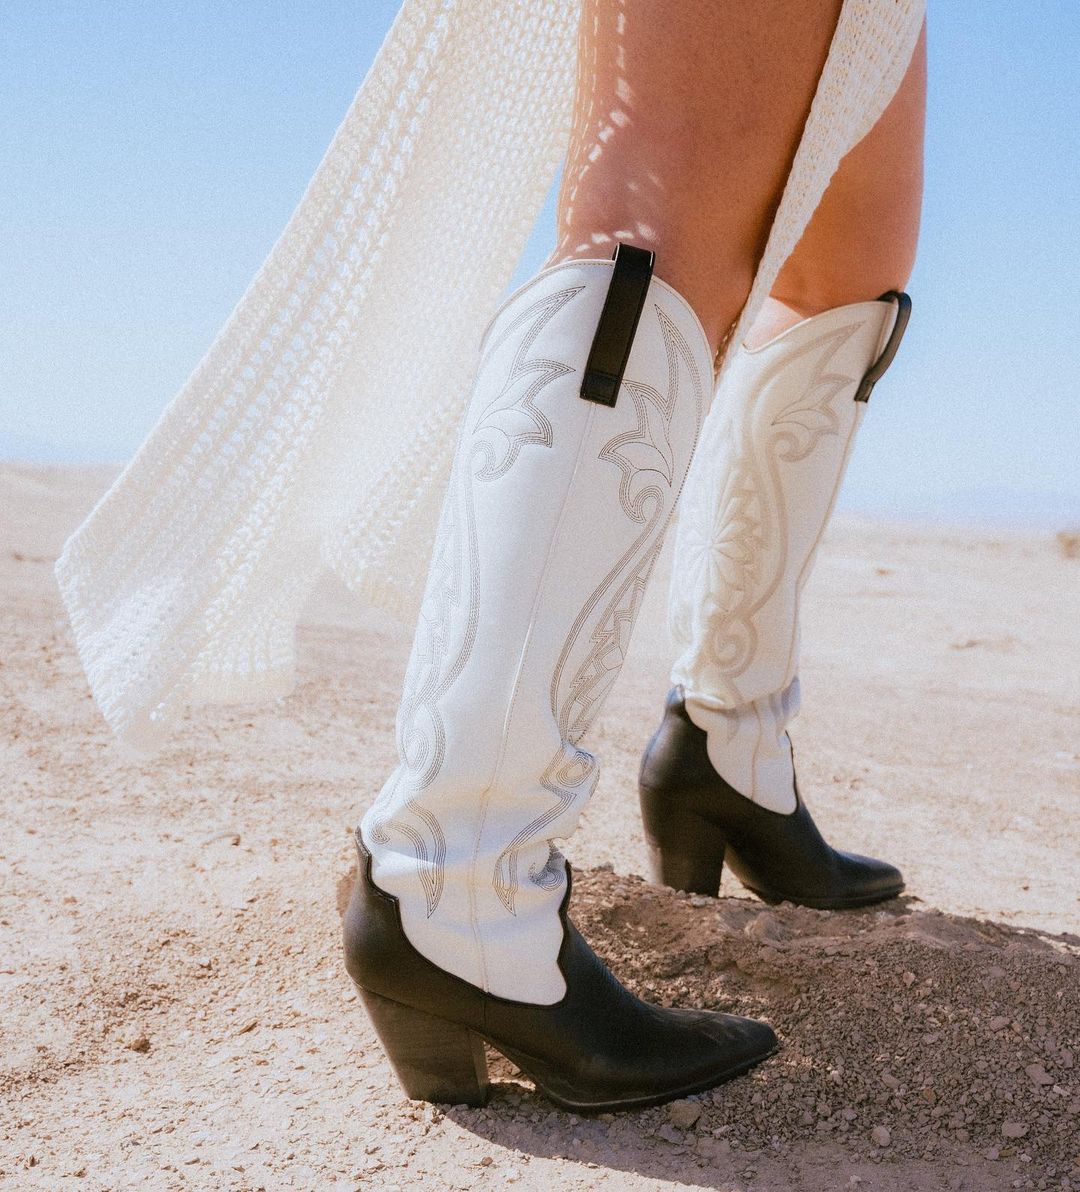 close-up image of a woman wearing tall black and white cowboy boots